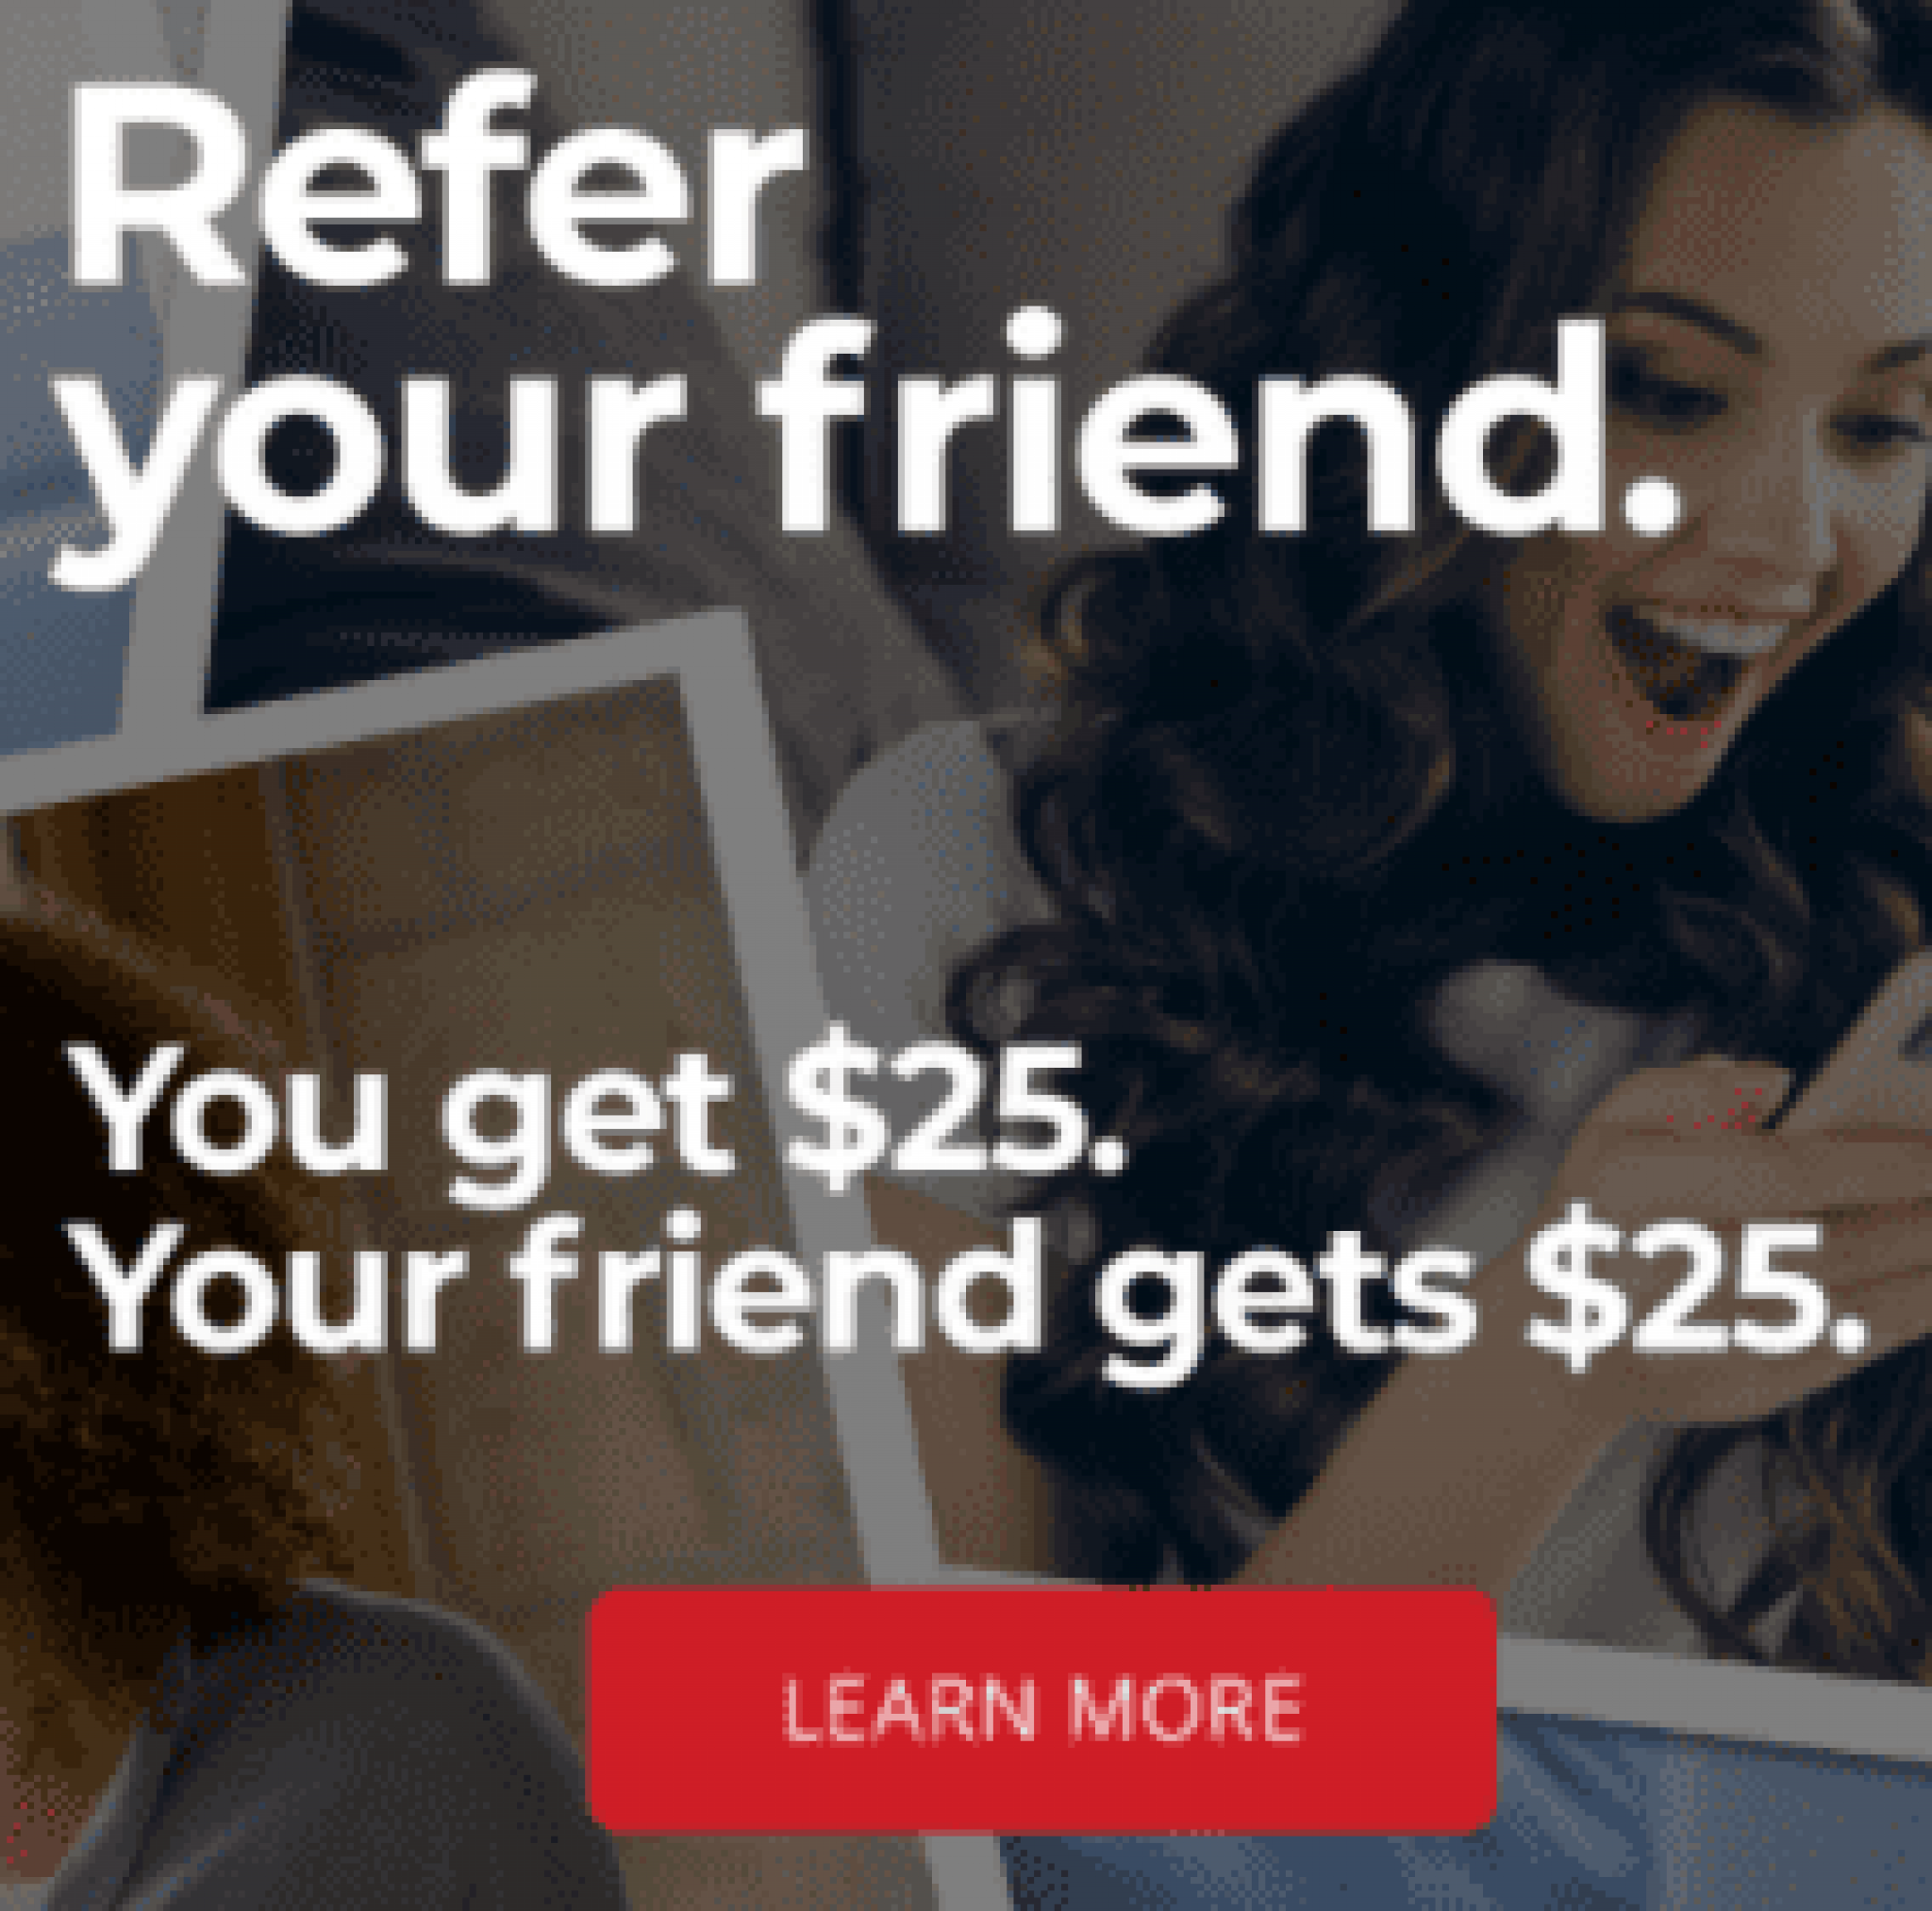 Red Pocket Referral Code [2022] Earn Up to 25 Now